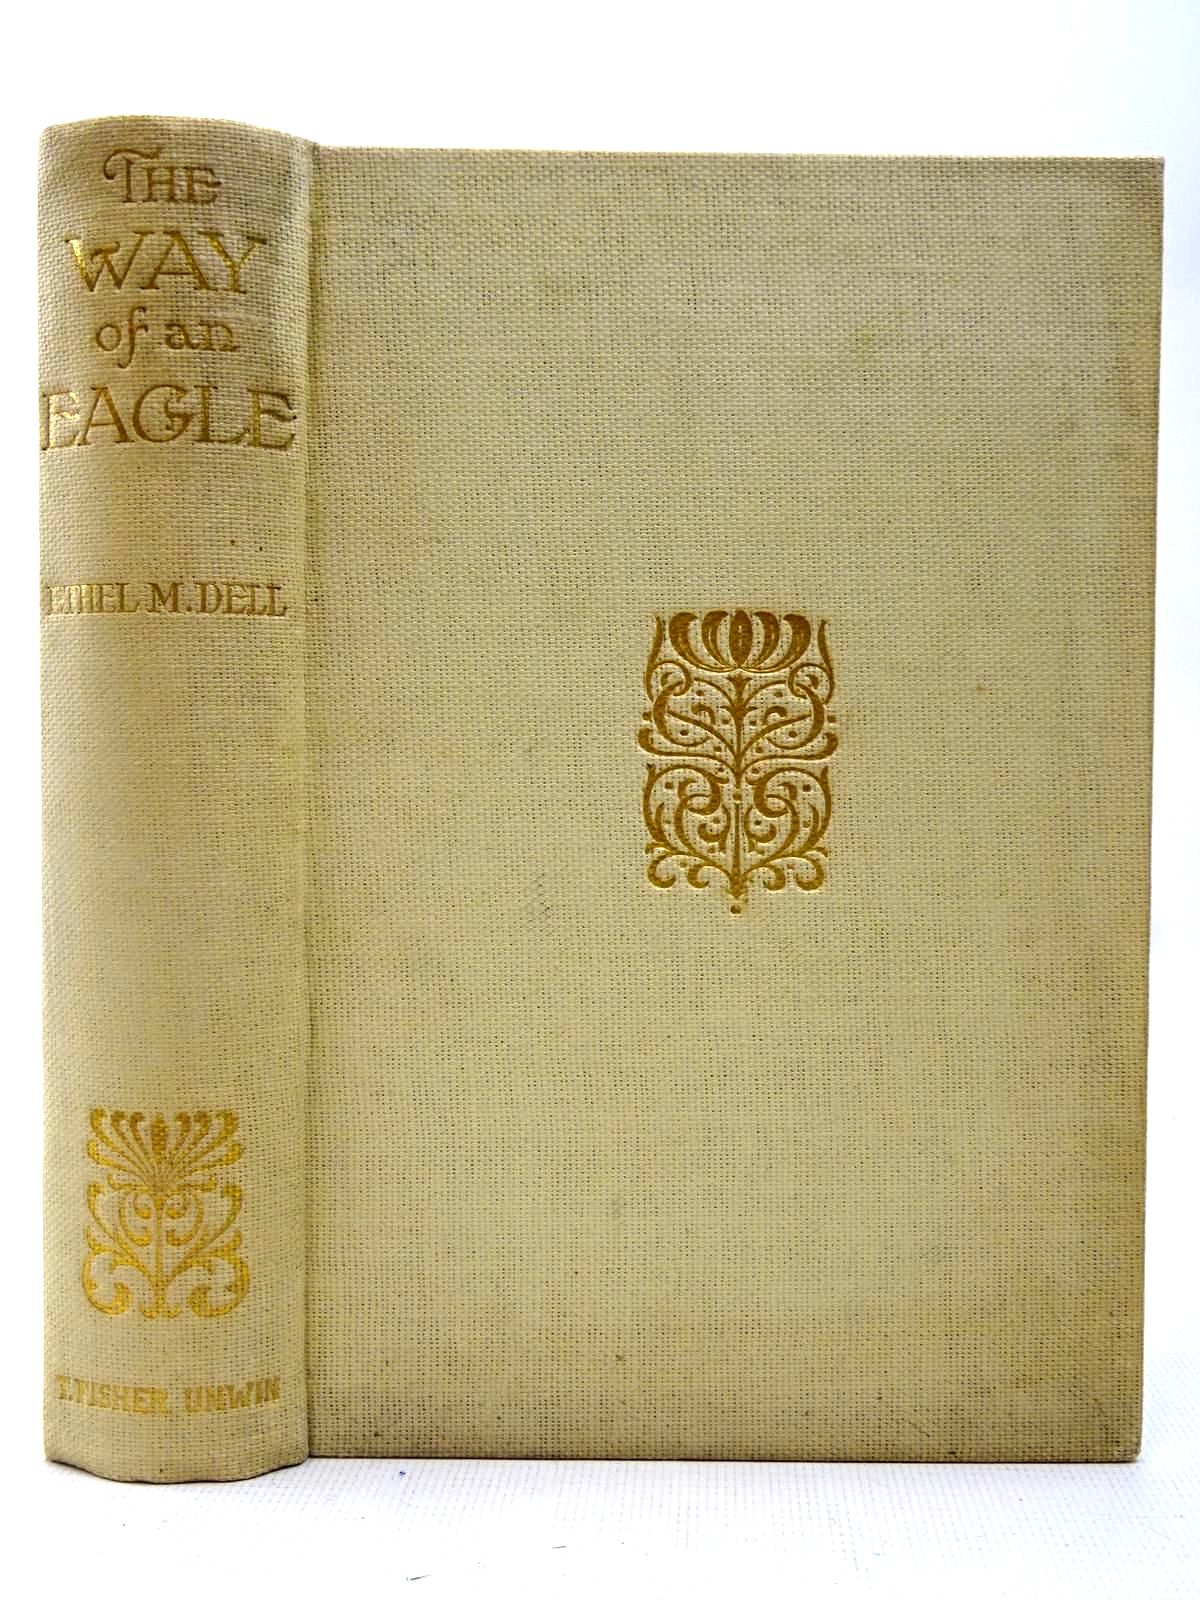 Photo of THE WAY OF AN EAGLE written by Dell, Ethel M. illustrated by Blampied, Edmund published by T. Fisher Unwin (STOCK CODE: 2127413)  for sale by Stella & Rose's Books